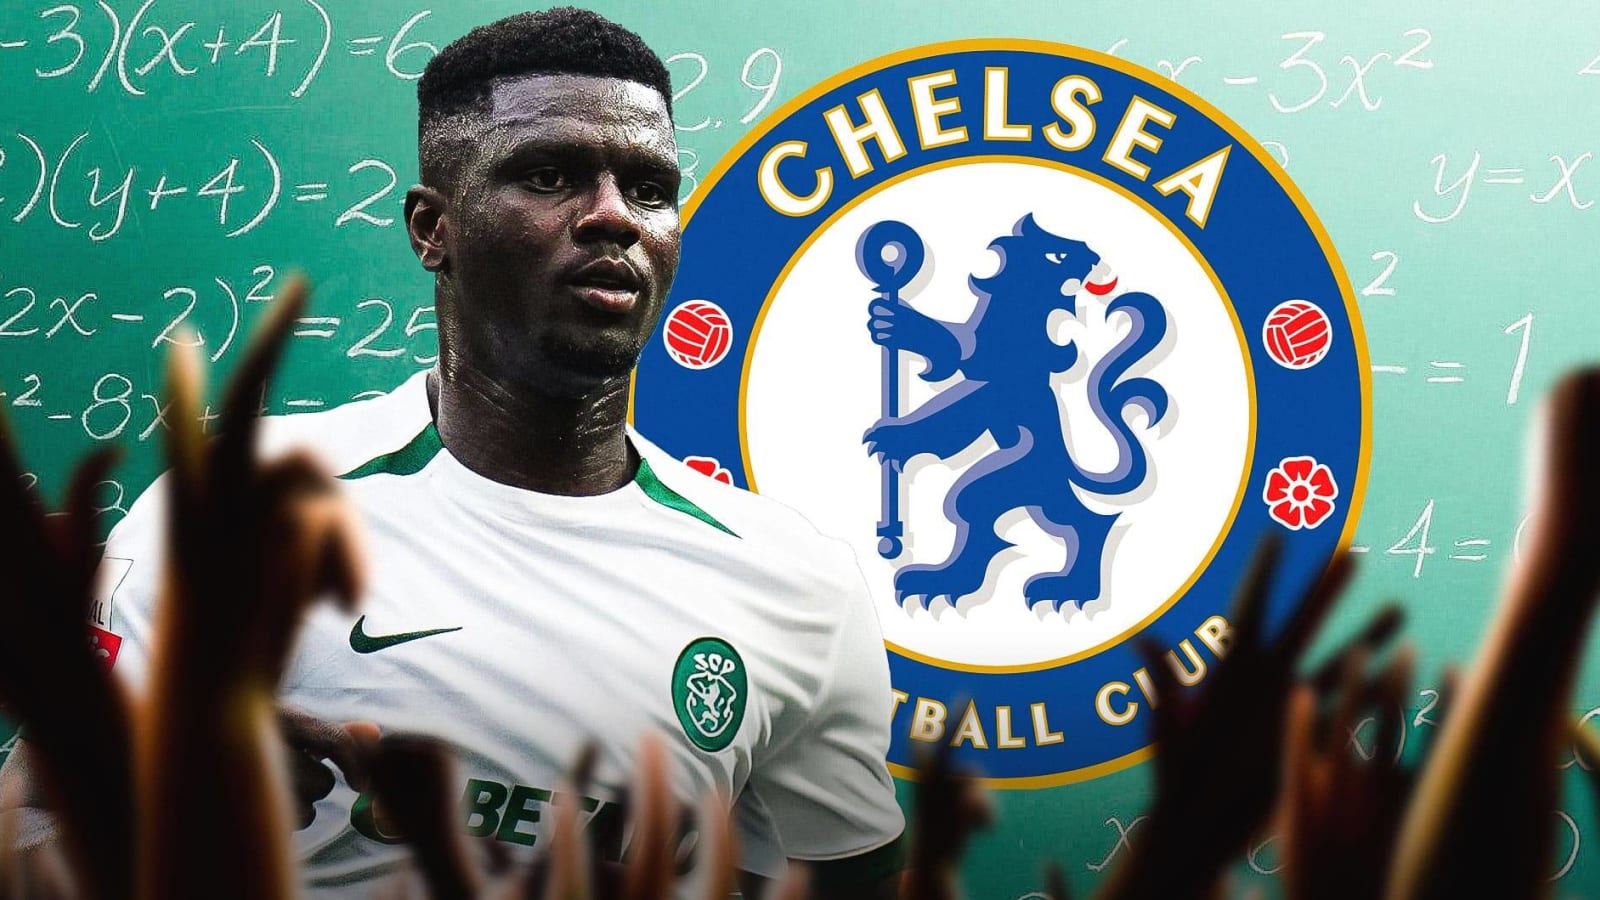 How can Ousmane Diomande fit into Chelsea’s transfer plans?